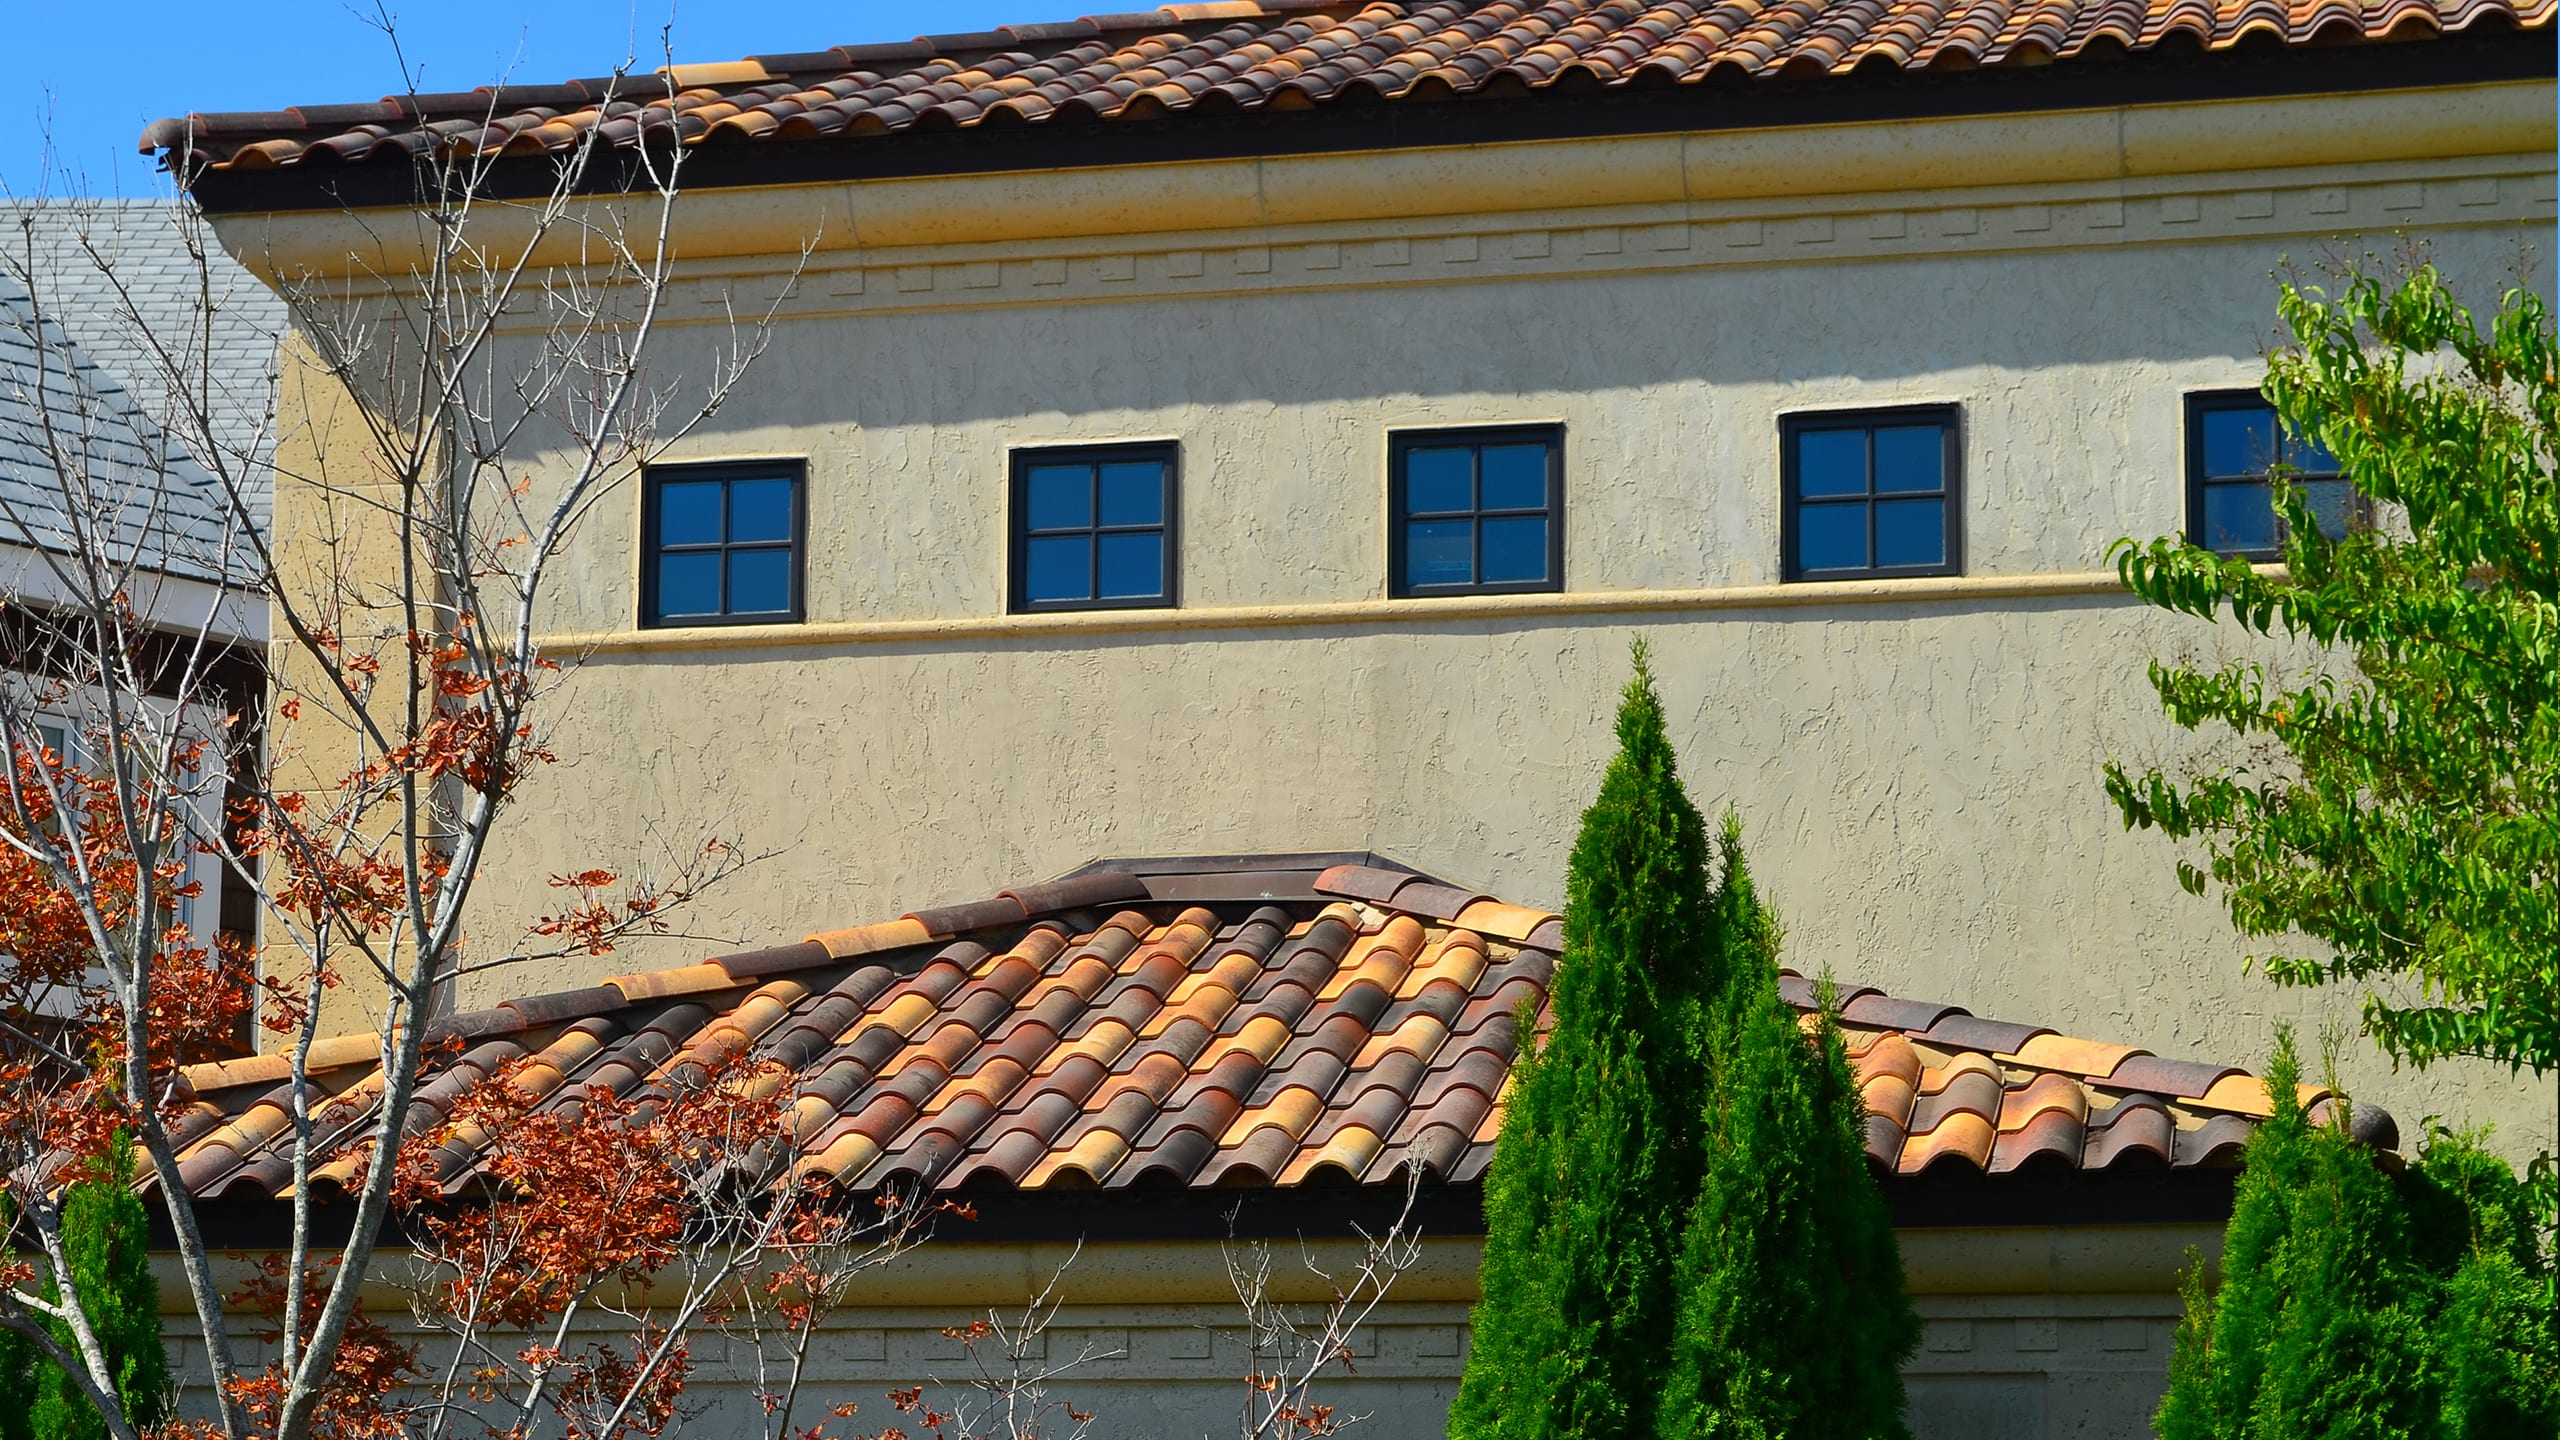 Private Residence in Ocean City Featuring Ludowici Spanish Clay Roof Tile